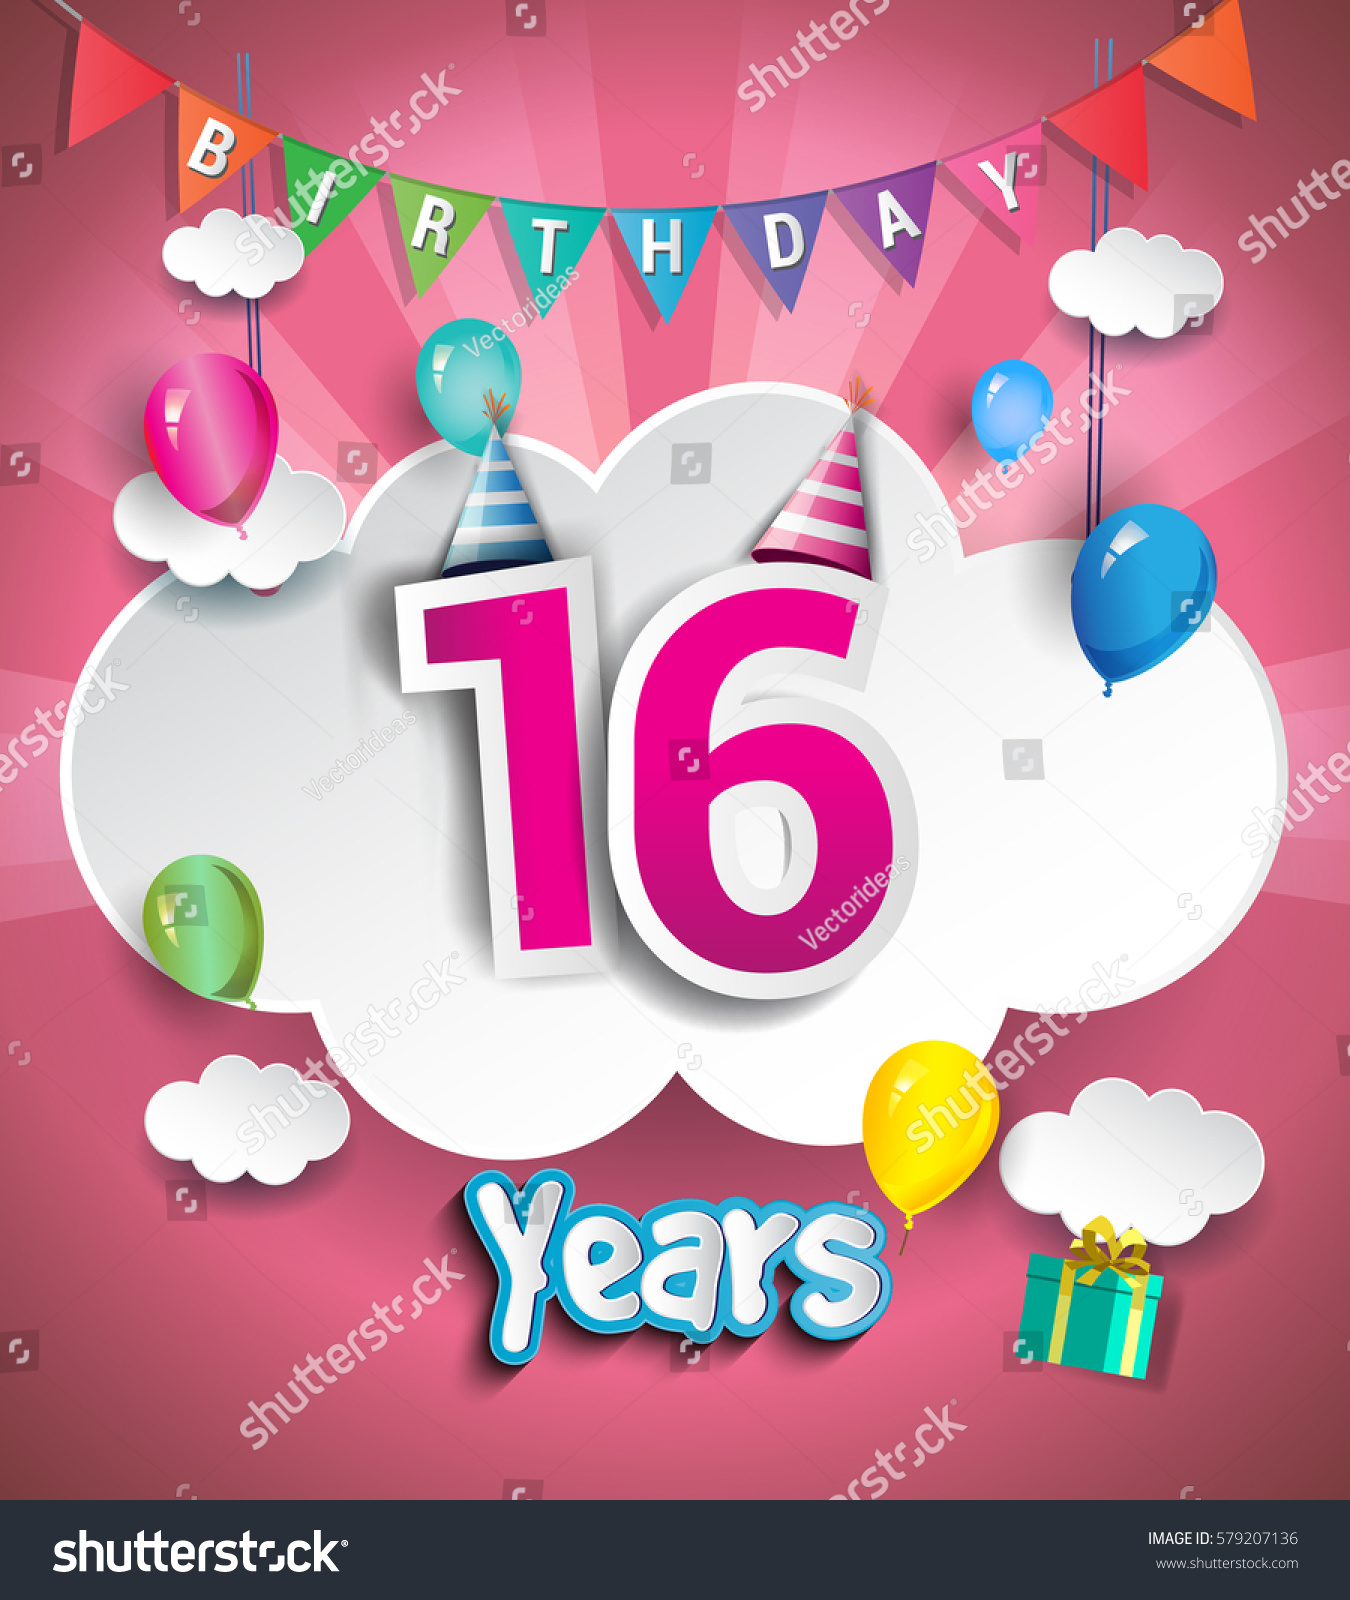 16th Anniversary Celebration Design Clouds Balloons Stock Vector ...